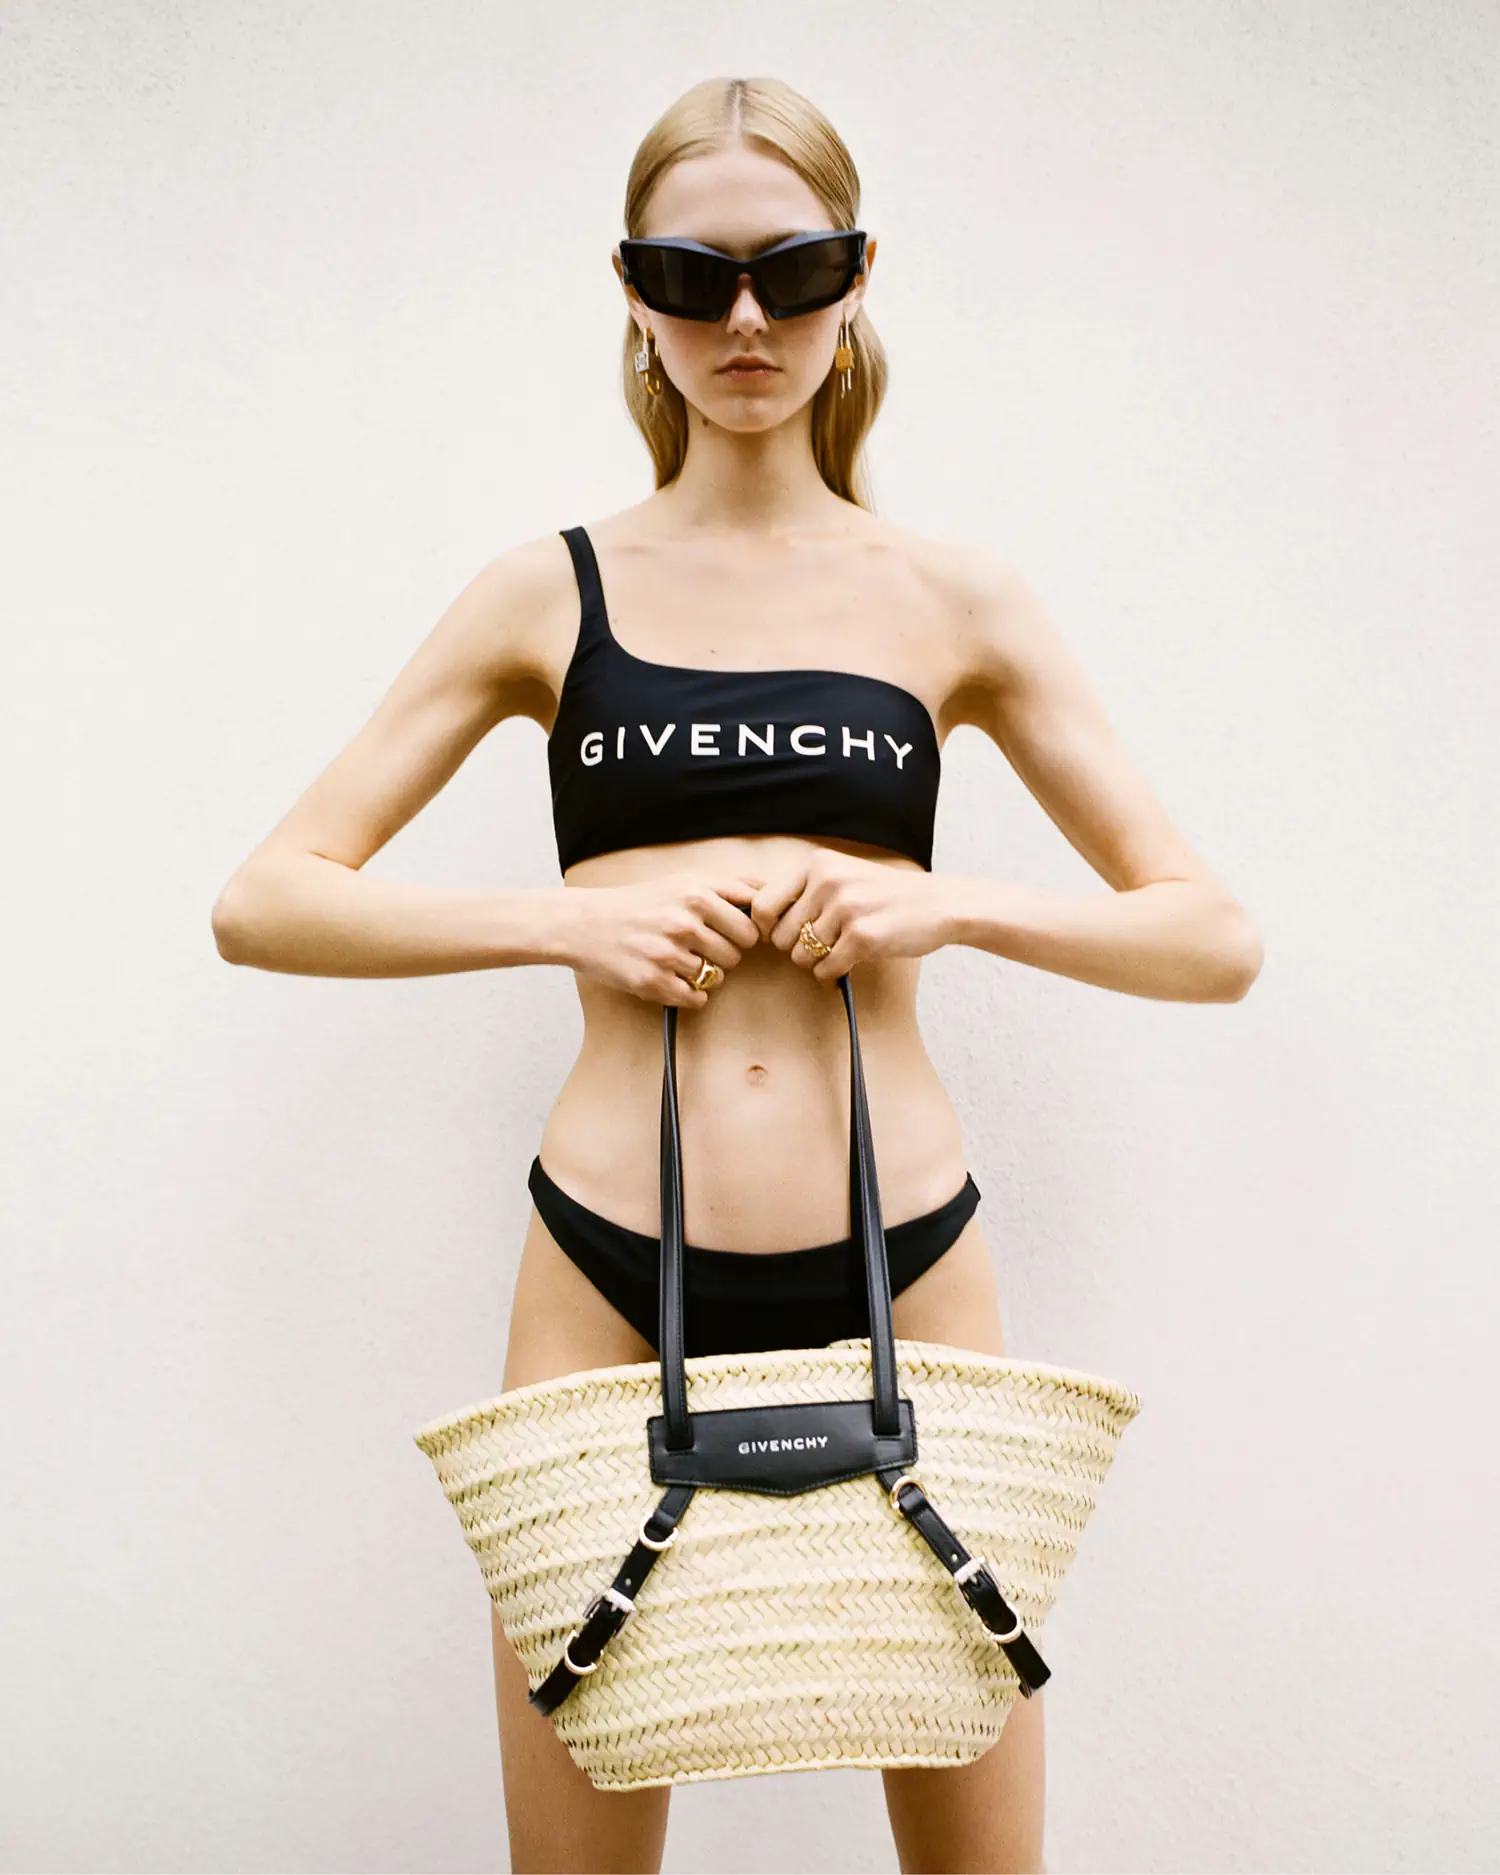 Givenchy Plage: A chic Summer ensemble